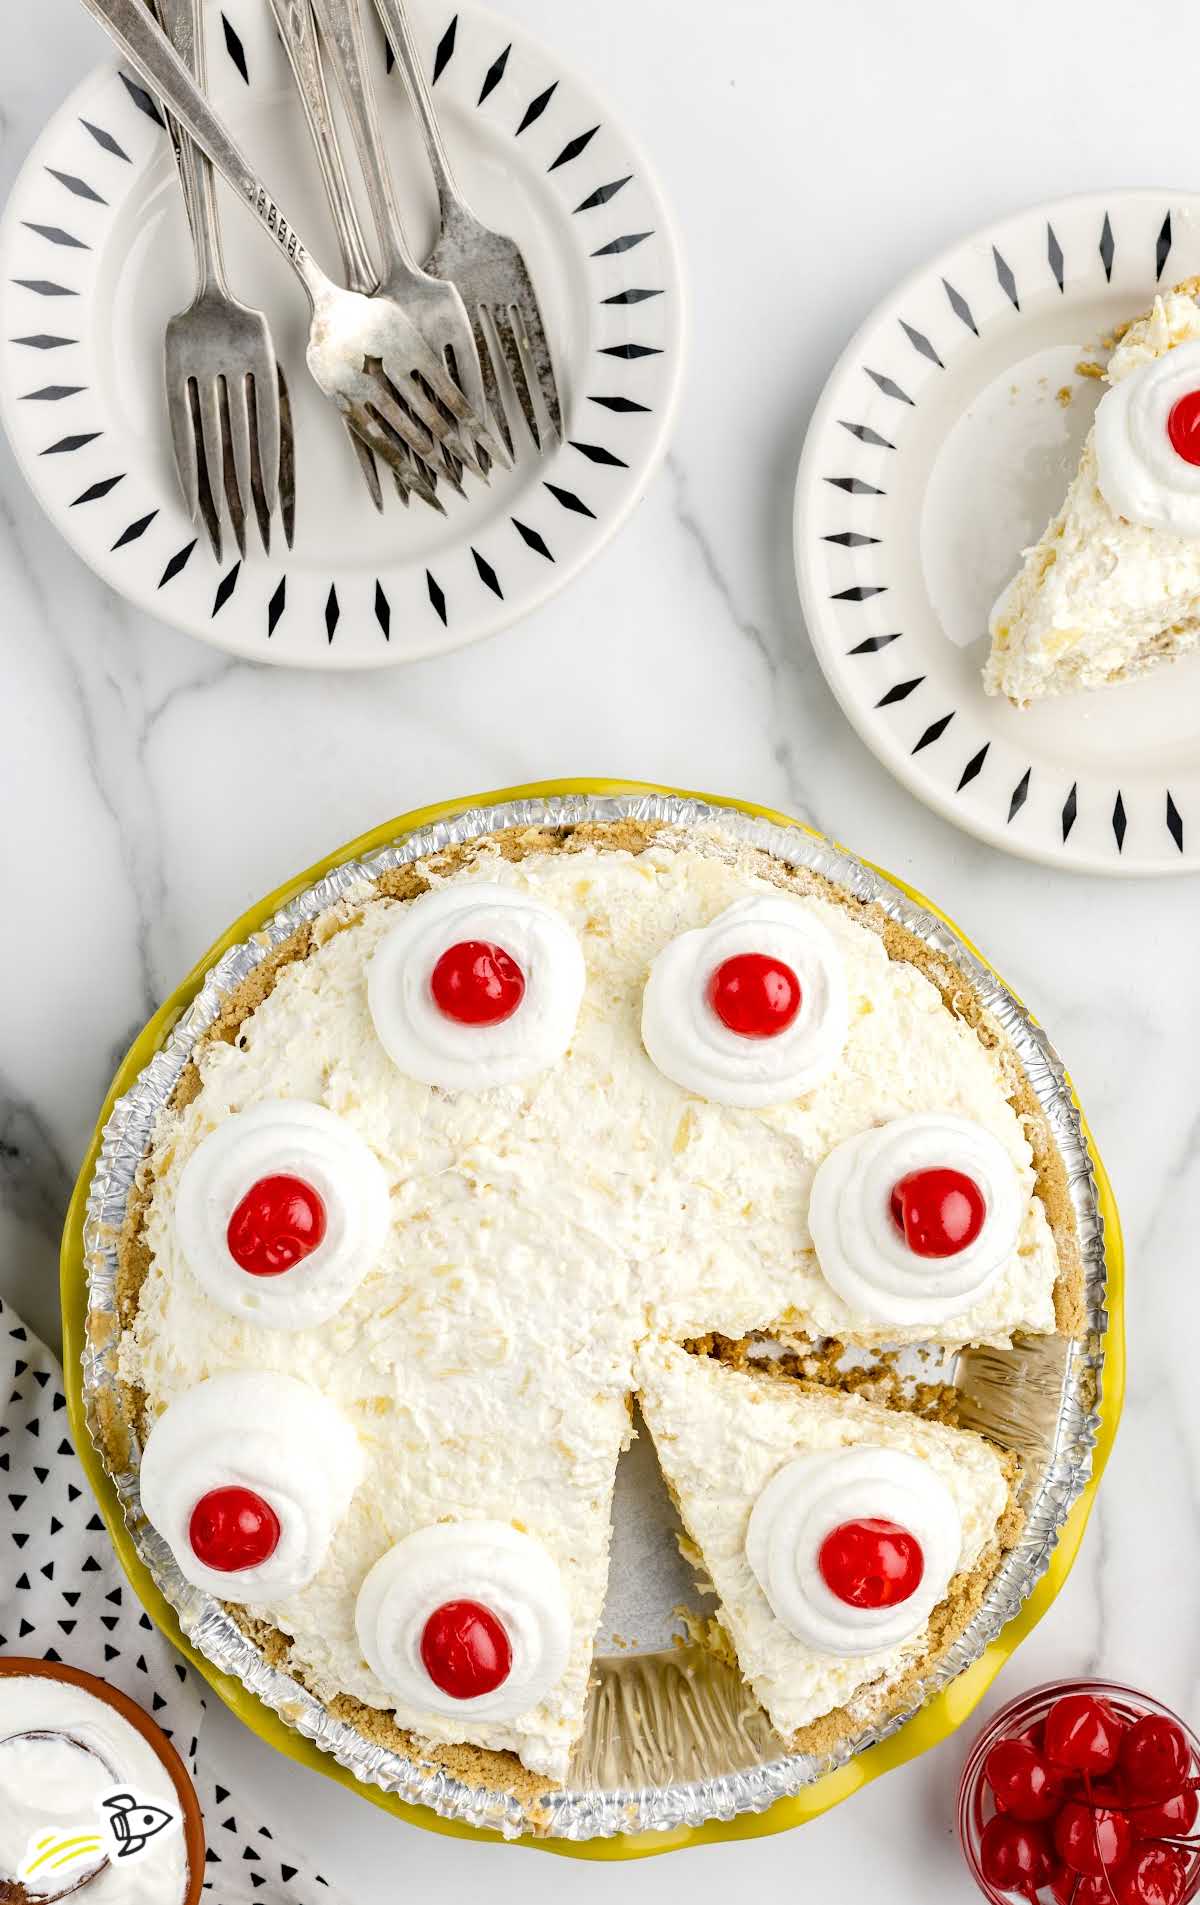 slices of Pineapple Pie topped with whipped cream and a cherries